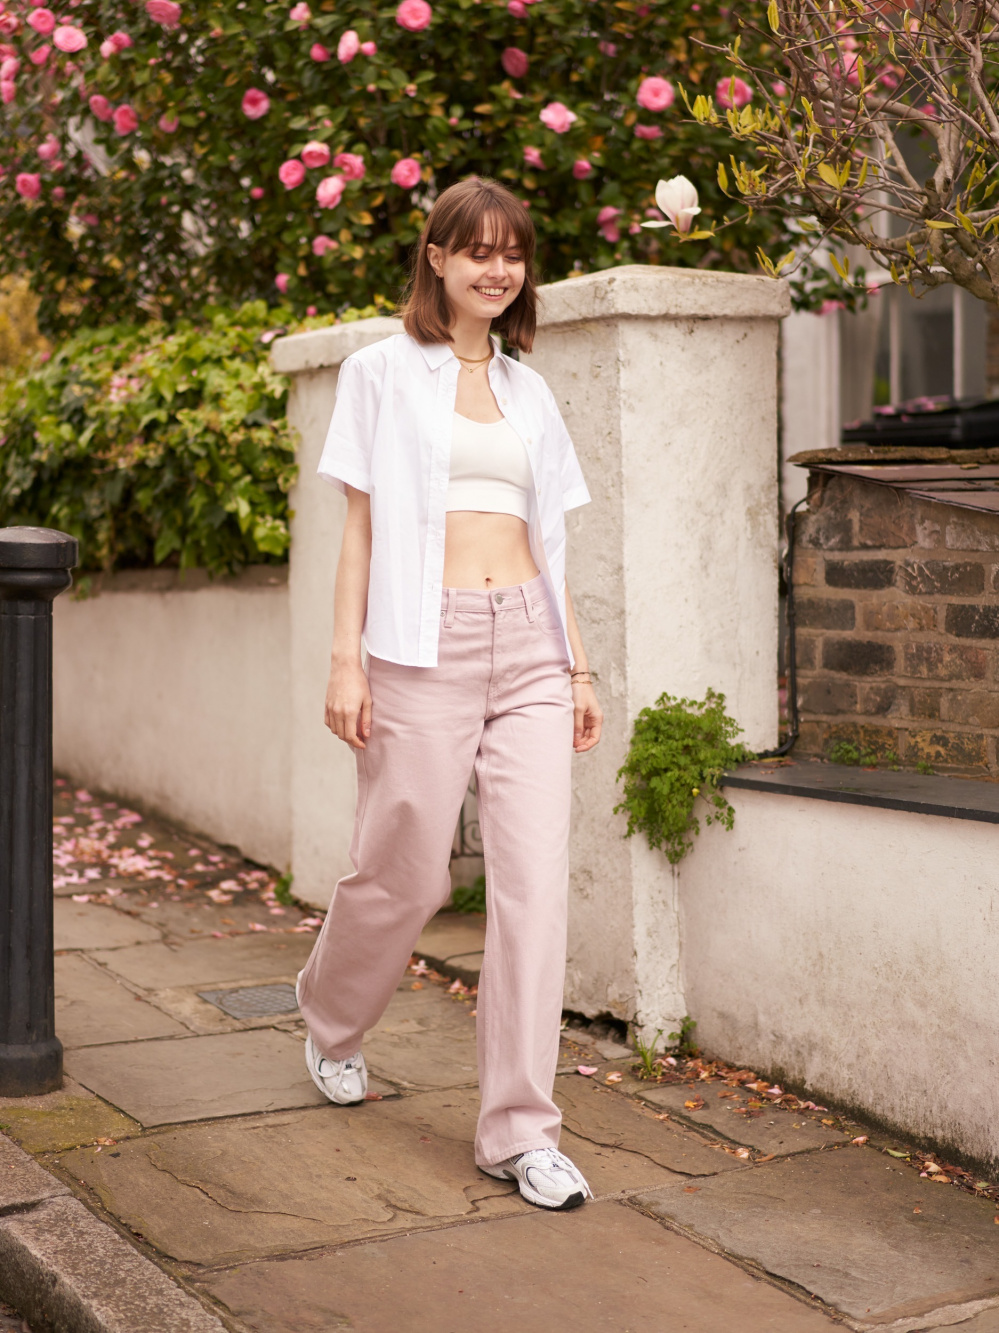 UNIQLO on X: Beat the heat while looking chic. Look effortless in our #AIRism  Bra Camisole & Drape Joggers.  @jordyntaylornow   / X